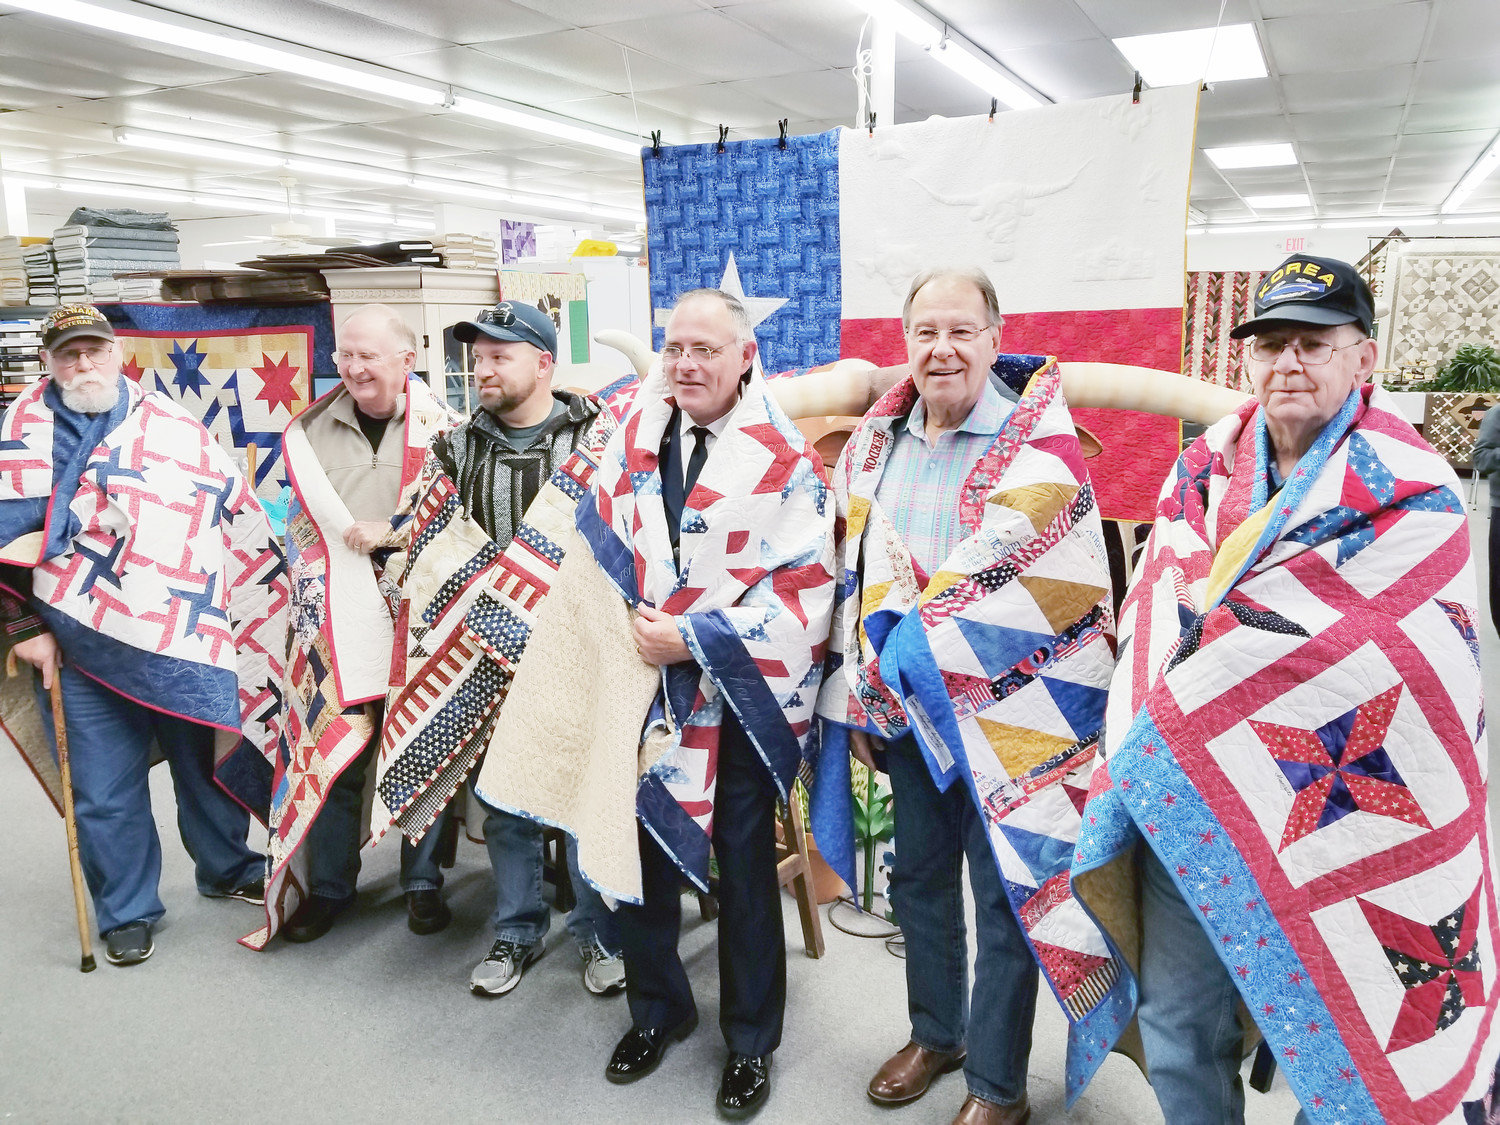 Quilts are made with love and have always been a symbol of warmth and comfort.  Quilts of Valor mean even more.  They provide a way for citizens to give back and serve our service members and veterans.  Saturday, six veterans were awarded Quilts of Valor at Stitchin’ Heaven in Mineola. From left are: Bruce Walker, Navy; Richard Fairbanks, Marines; James Wilson, Army; Ben Hudman, Air Force; Joe Hamby, Army; and John Burns, Army. THe QOV sewing group meets the last Wednesday of each month at Stitchin’ Heaven. To learn more, visit visit www.QOVF.org (Courtesy photo).